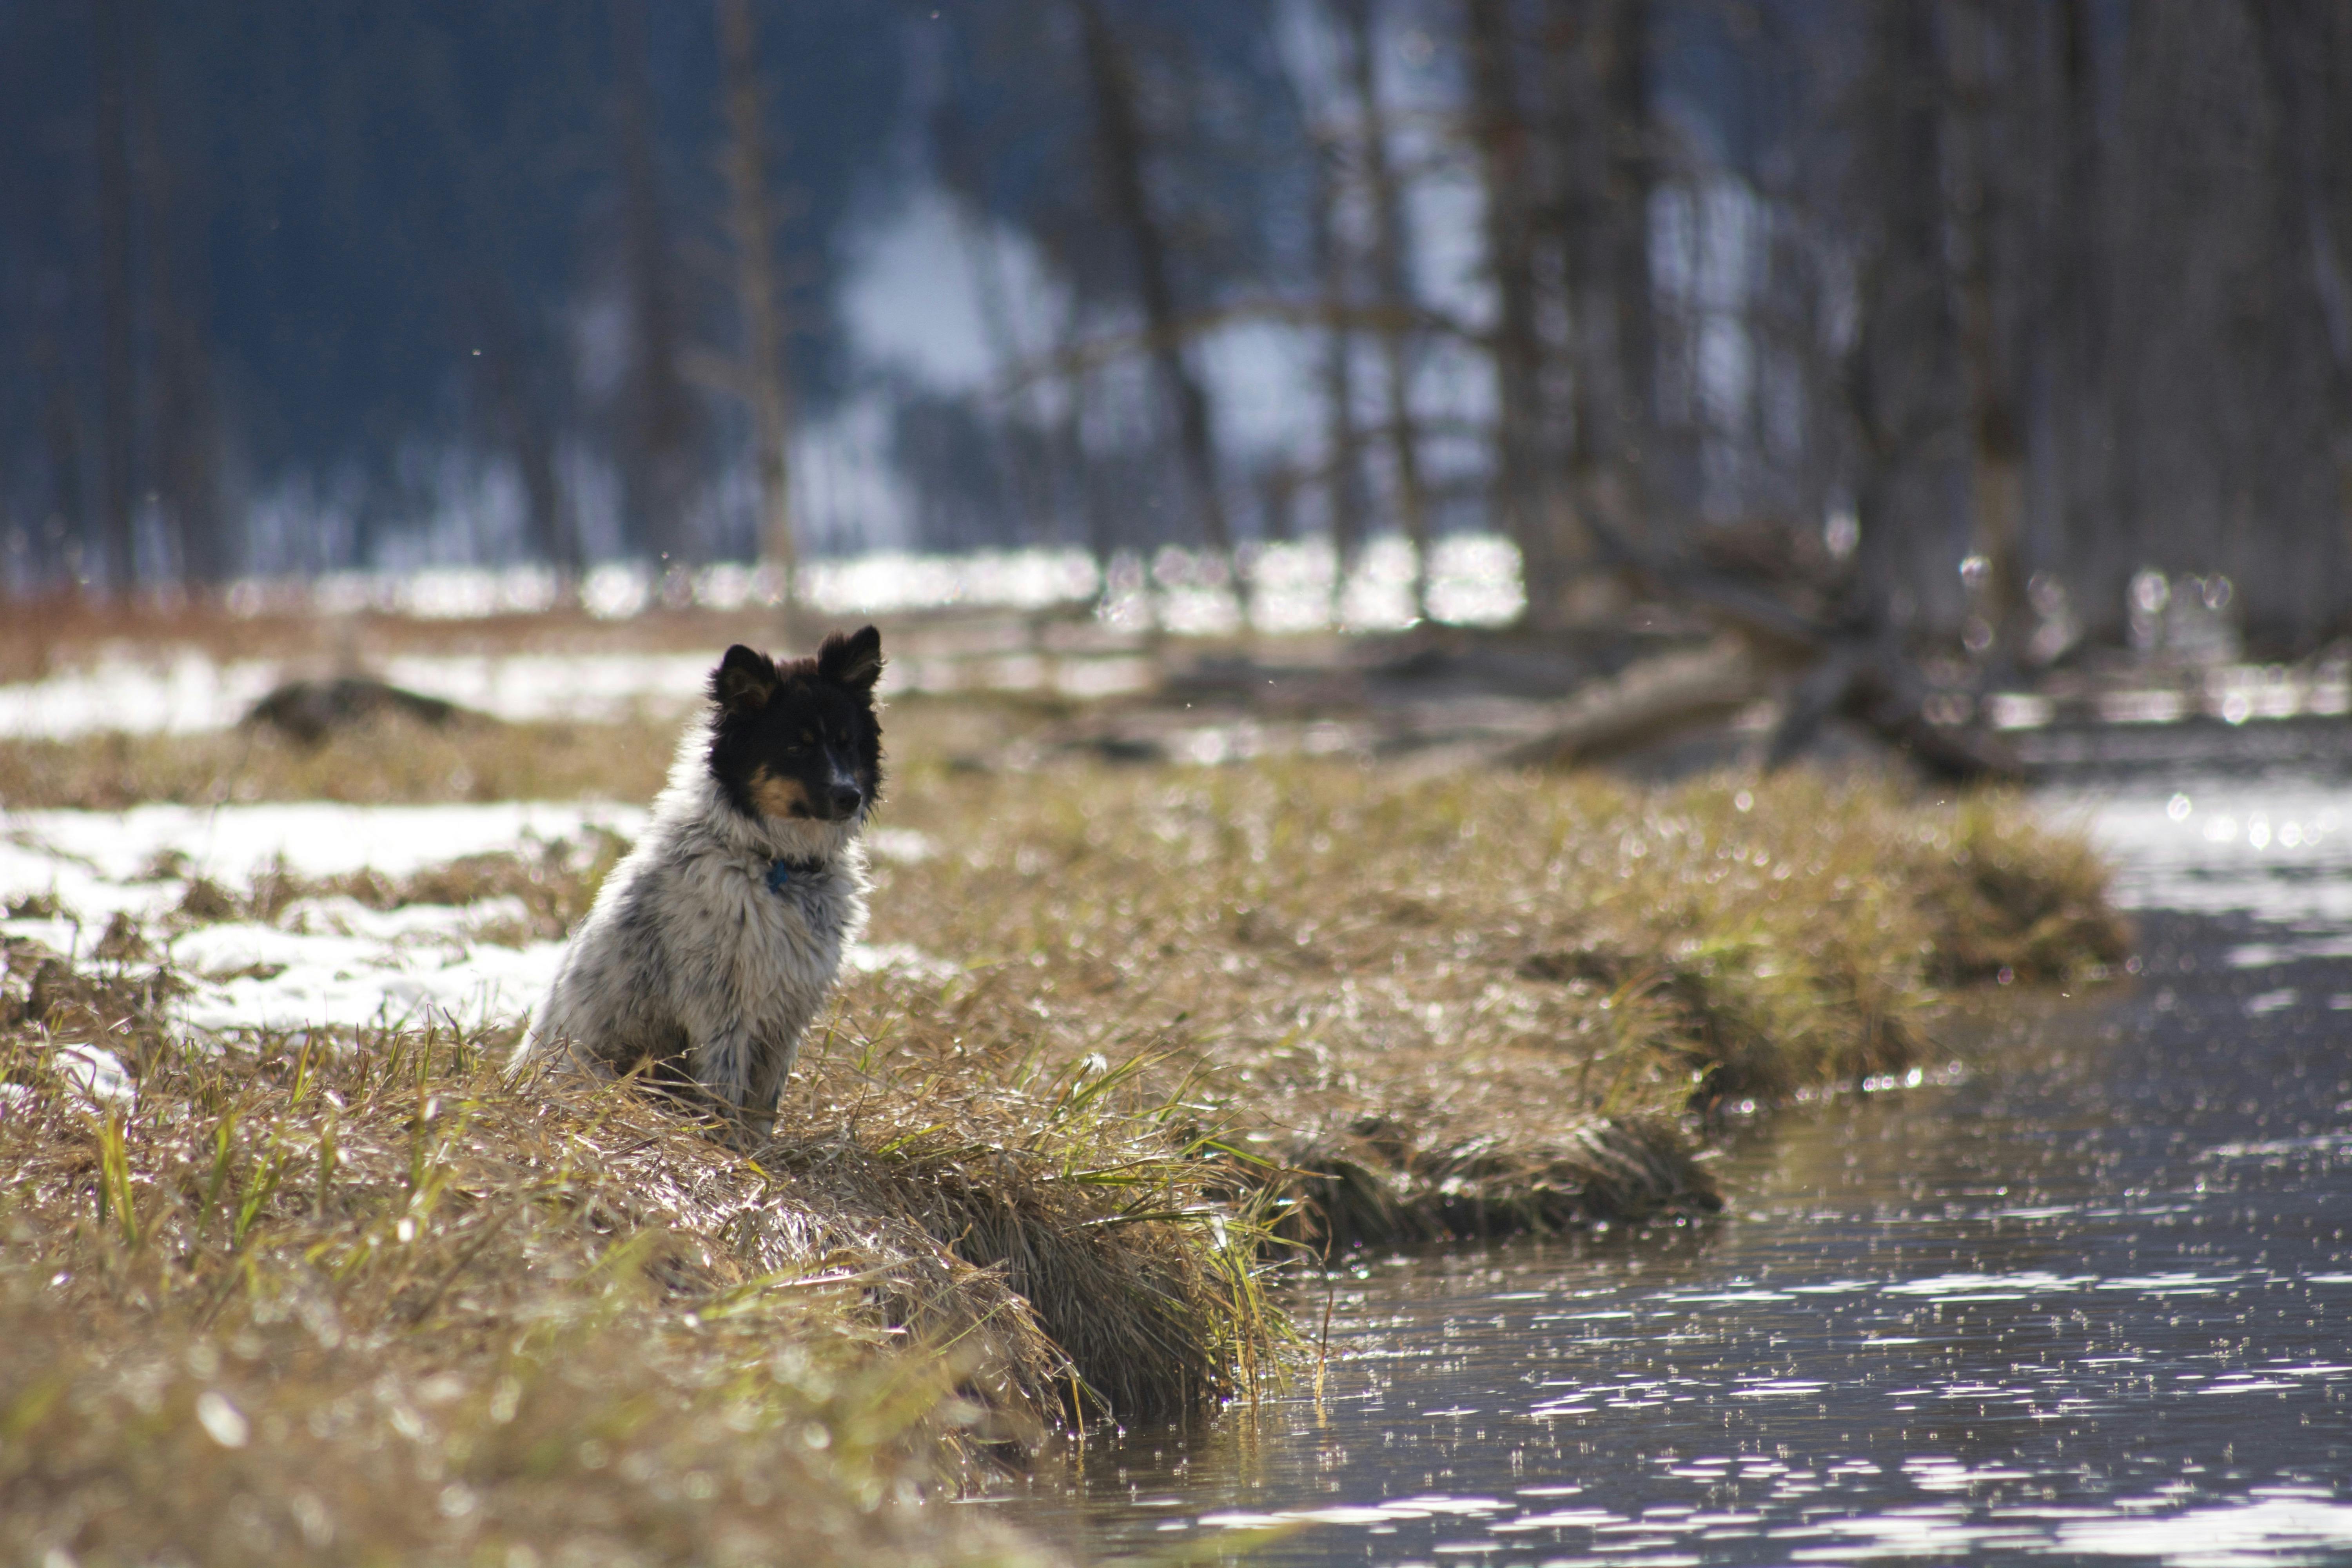 A black and white dog sits on a grassy river bank